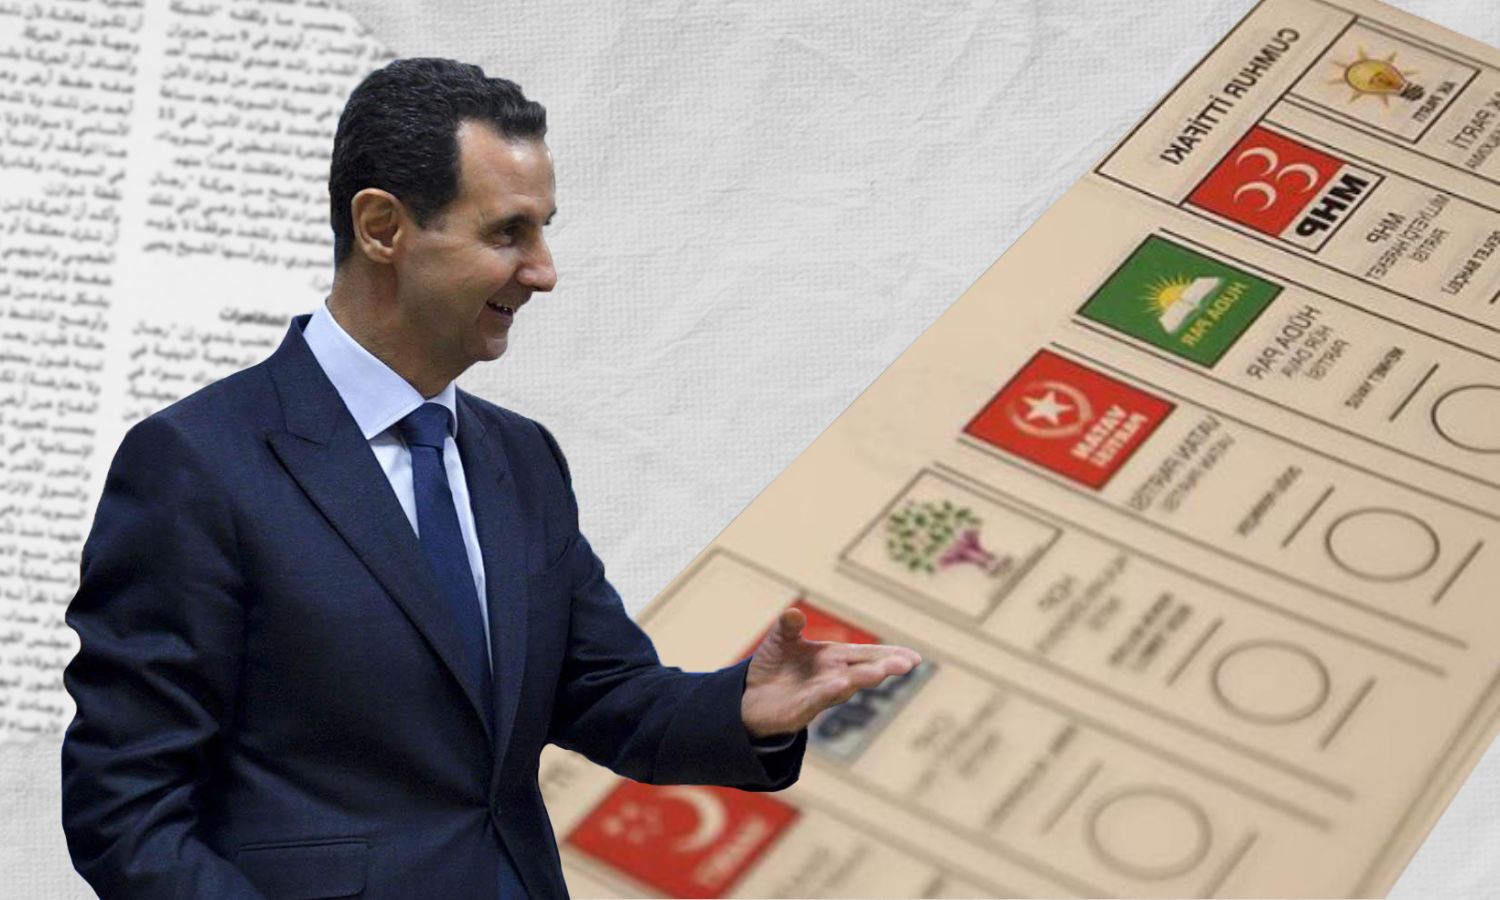 The head of the Syrian regime, Bashar al-Assad, in the background an electoral paper showing the names of the Turkish parties (modified by Enab Baladi)